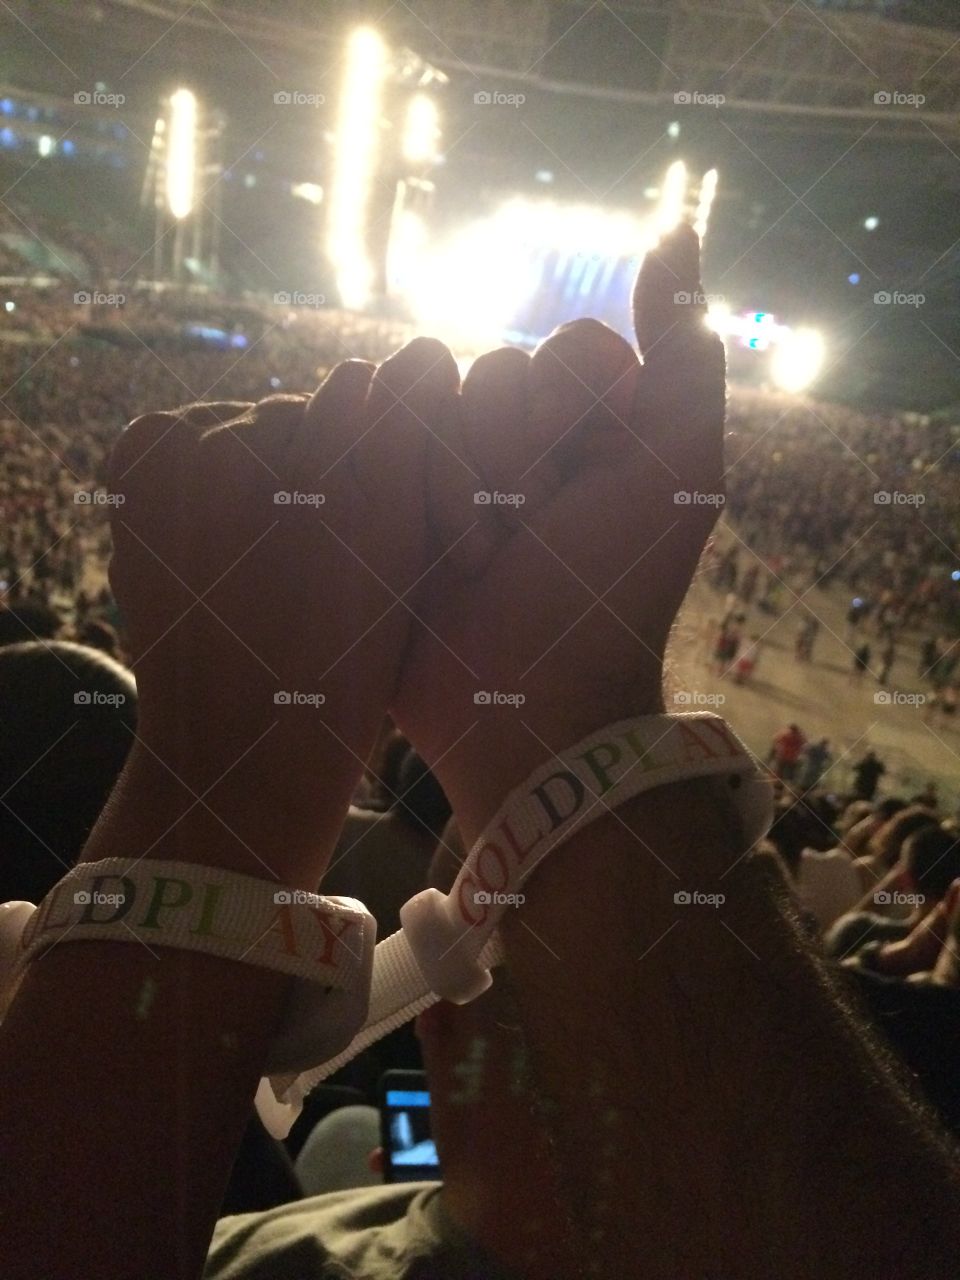 Coldplay show in Brazil. 